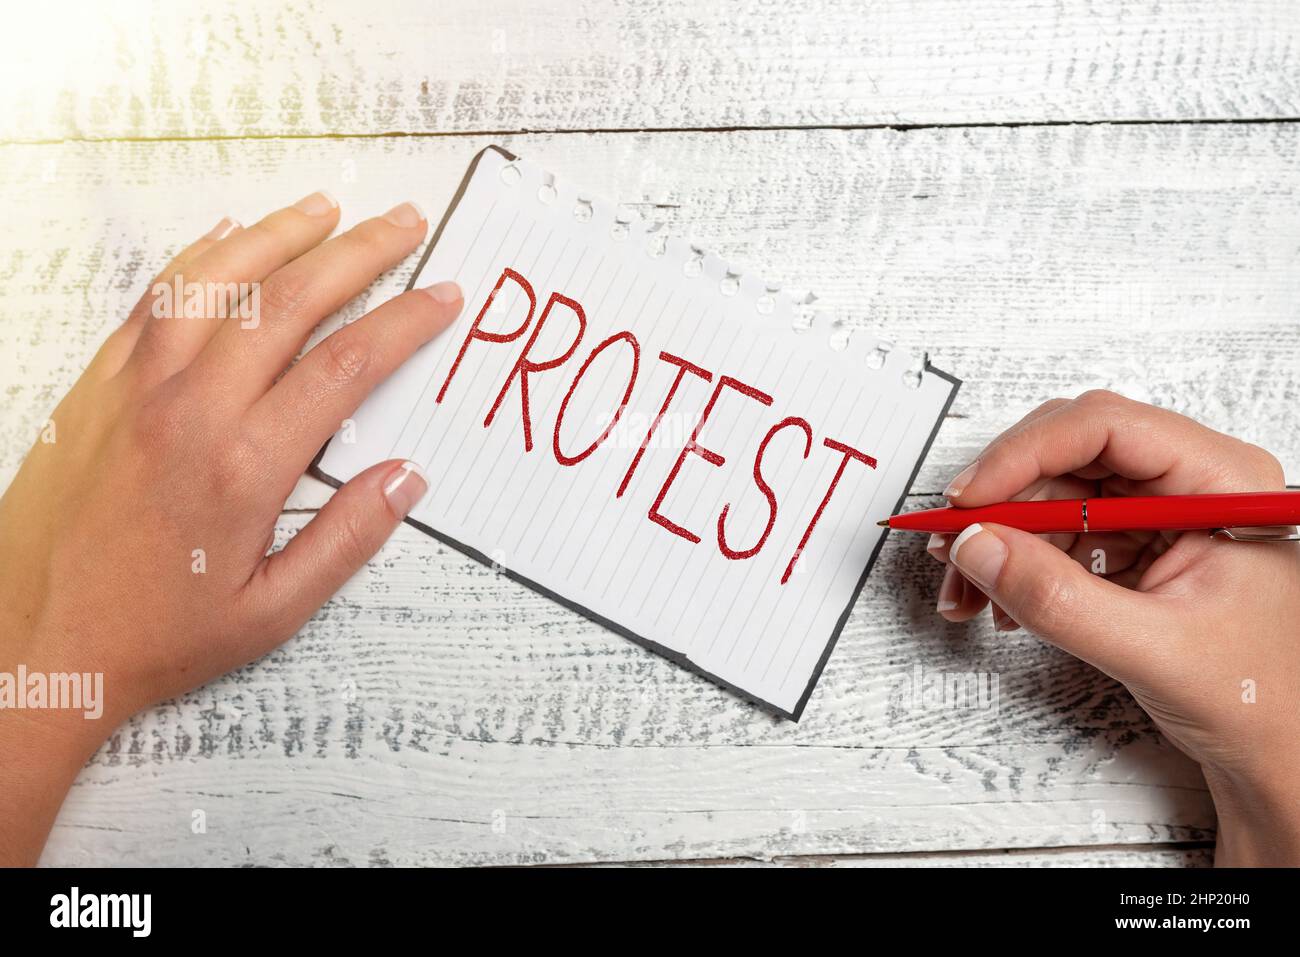 Text showing inspiration Protest, Business overview An action expressing disapproval of or objection to something Brainstorming Problems And Solutions Stock Photo